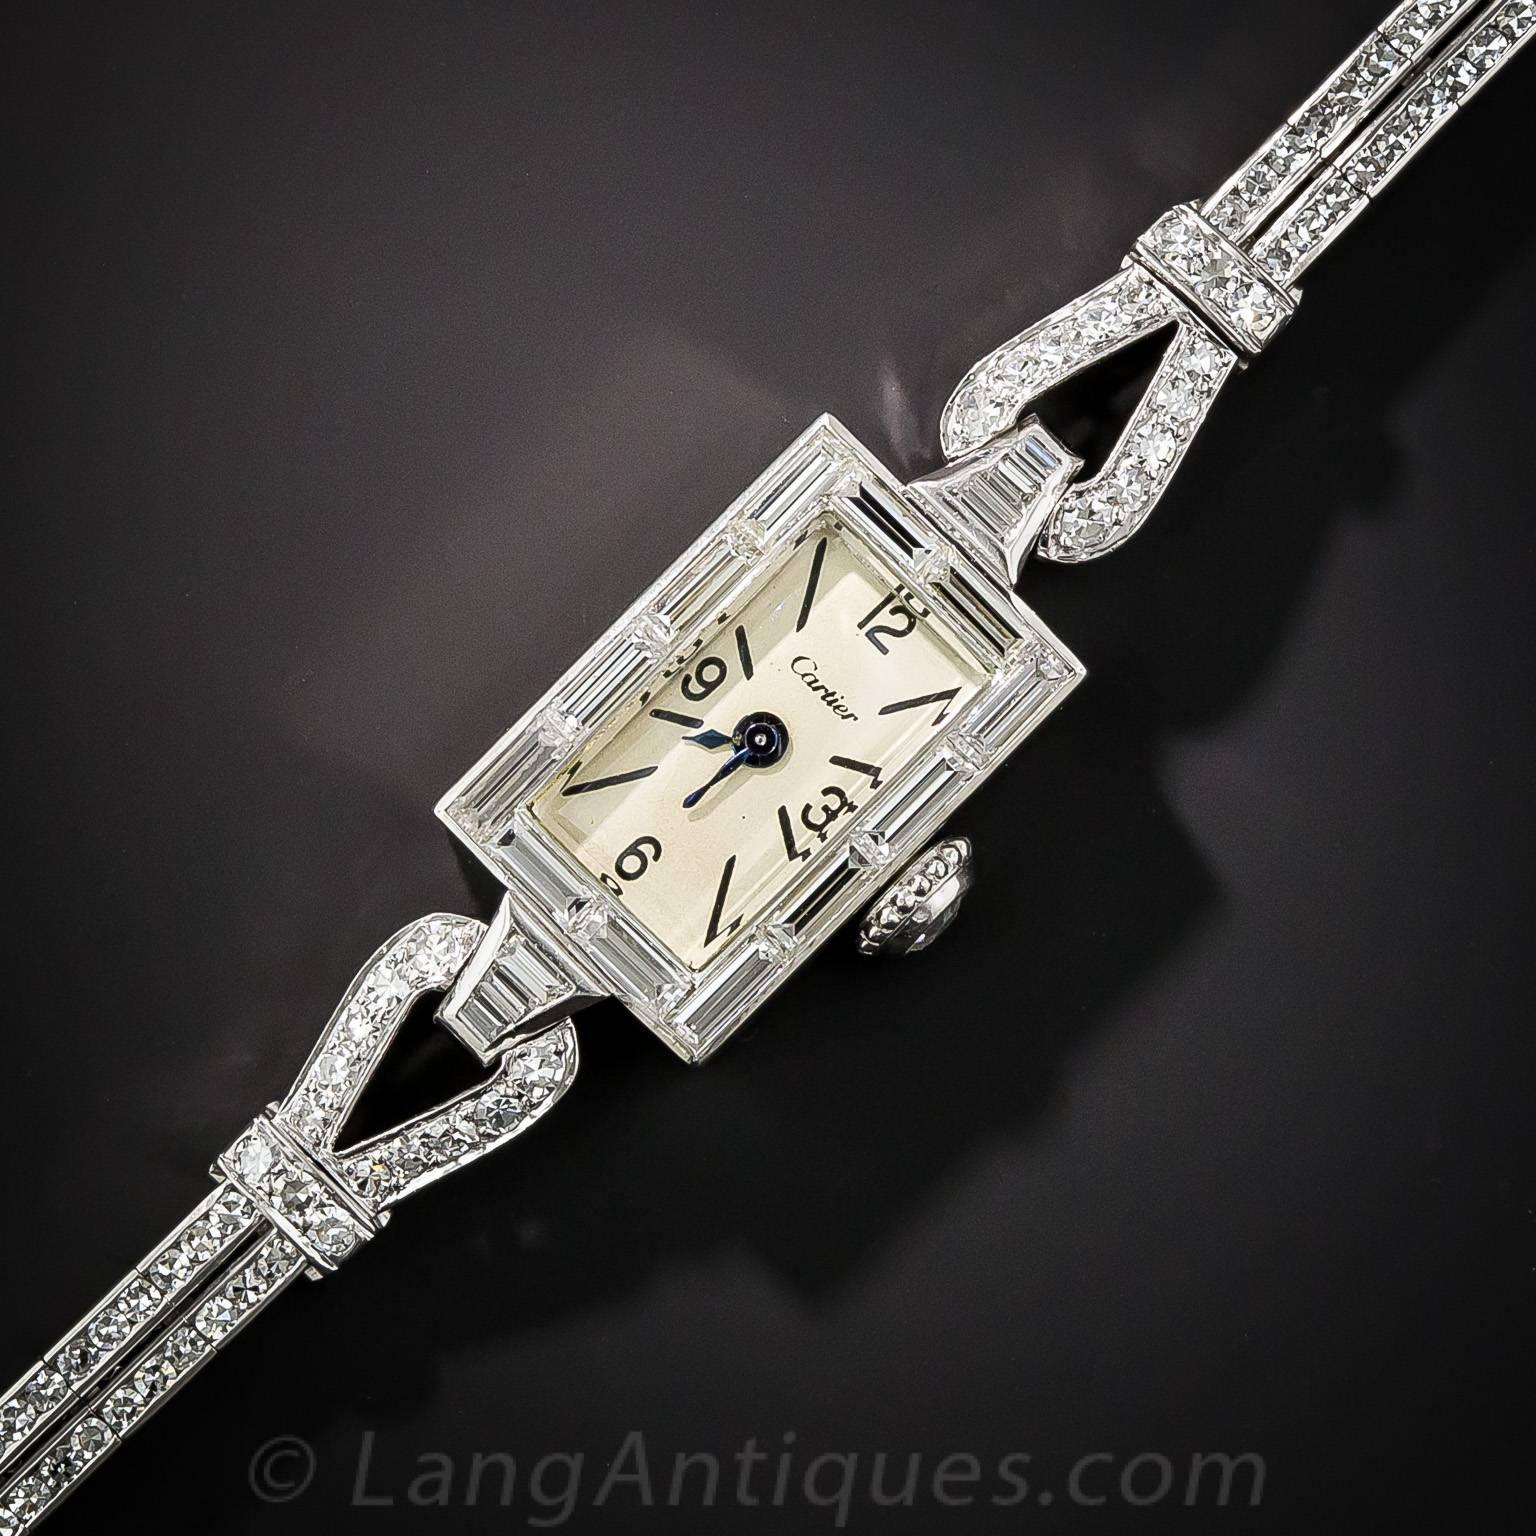 A sleek, stylish and sexy bracelet watch dating from the mid- twentieth century, superbly crafted in platinum by Cartier. The rectangular timepiece is framed in glistening baguette diamonds and transitions, via stirrup motifs, into a slender double